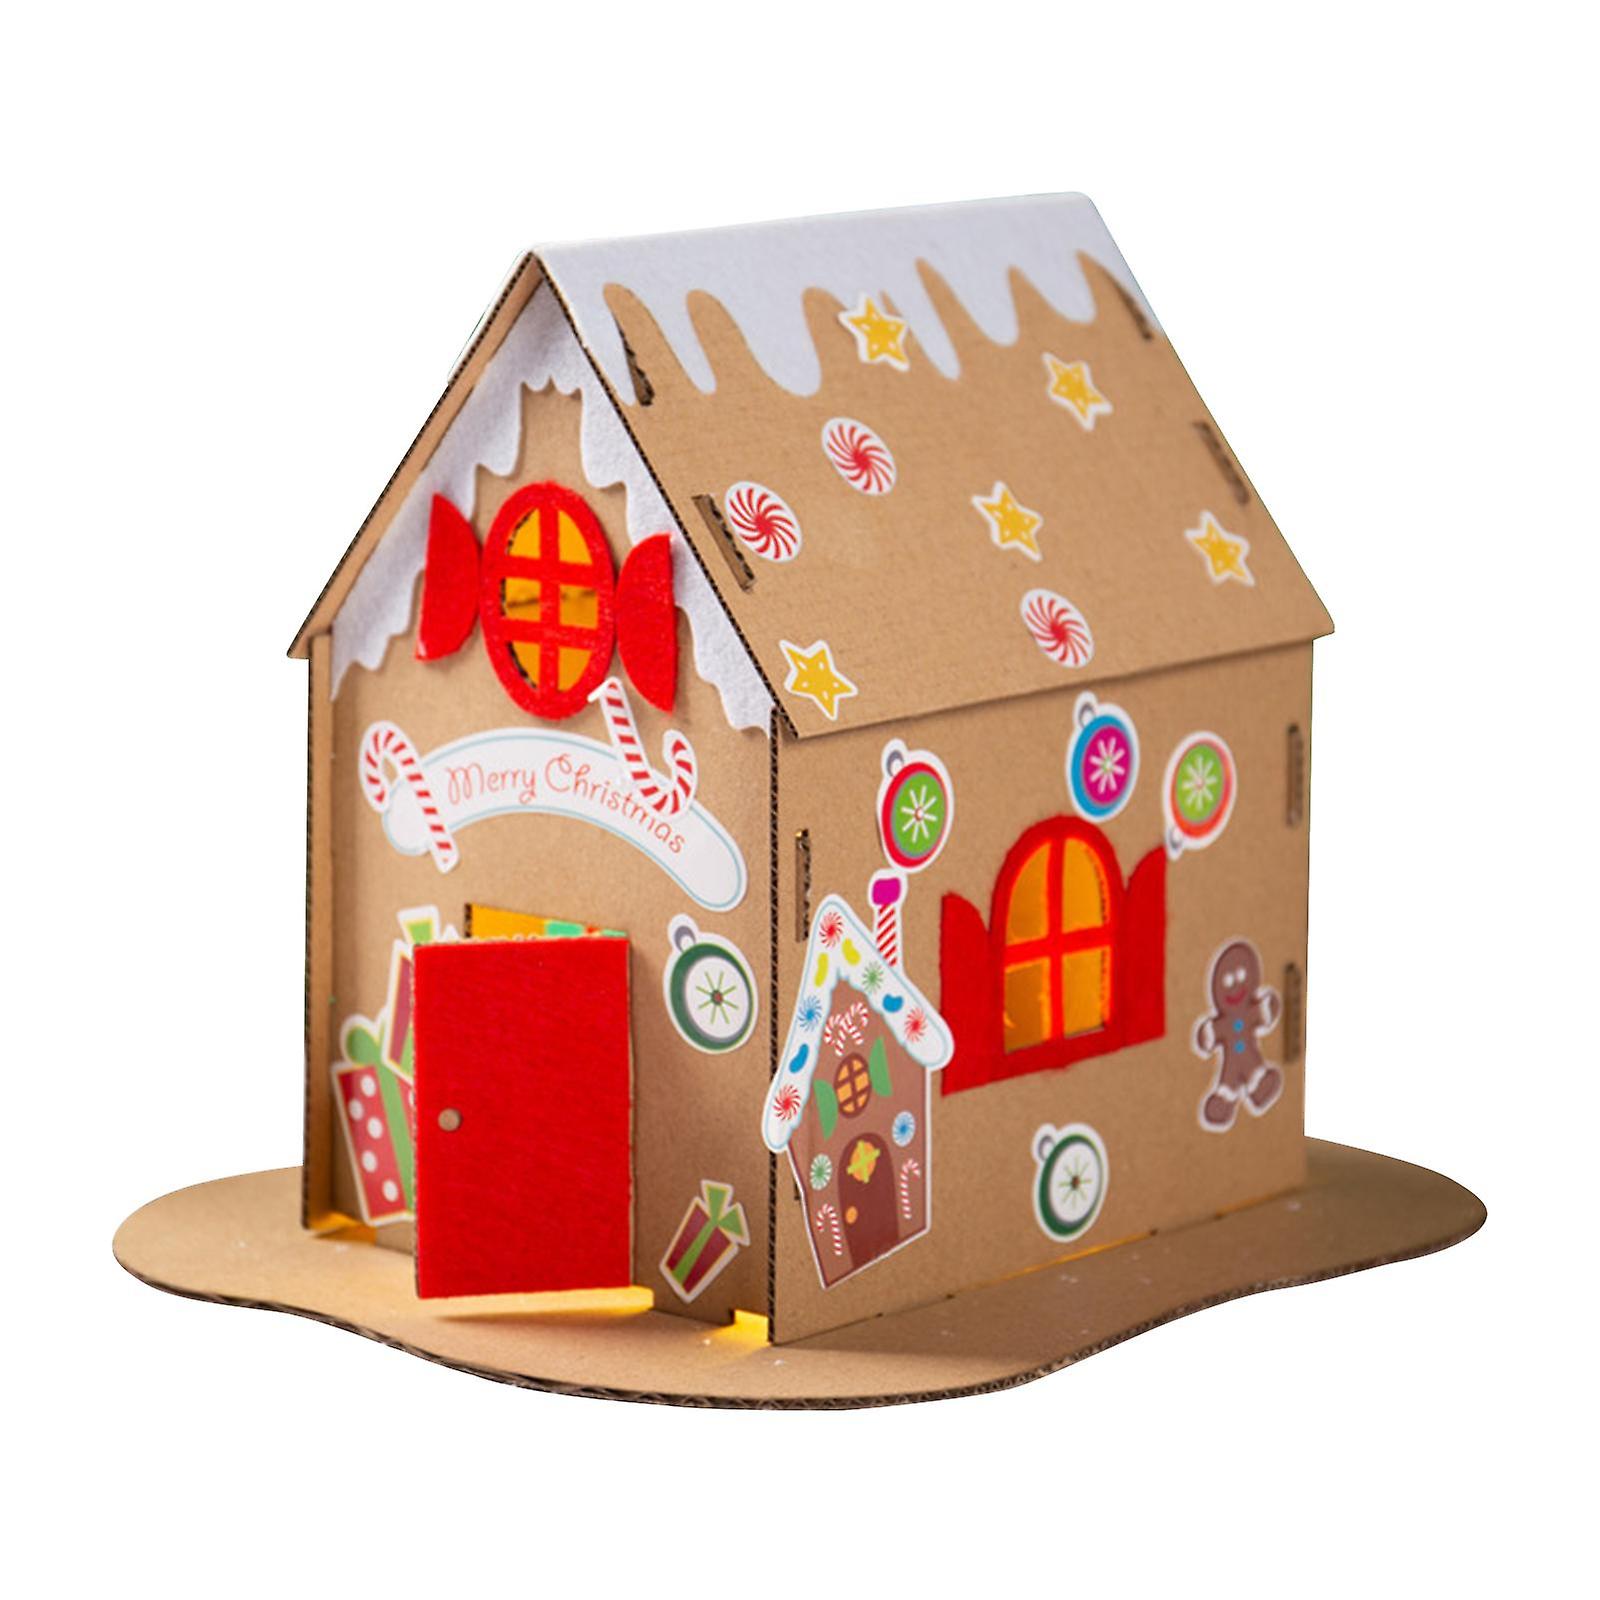 Christmas Cardboard House Kits Unassembly Cardboard House For Children Kids Style C